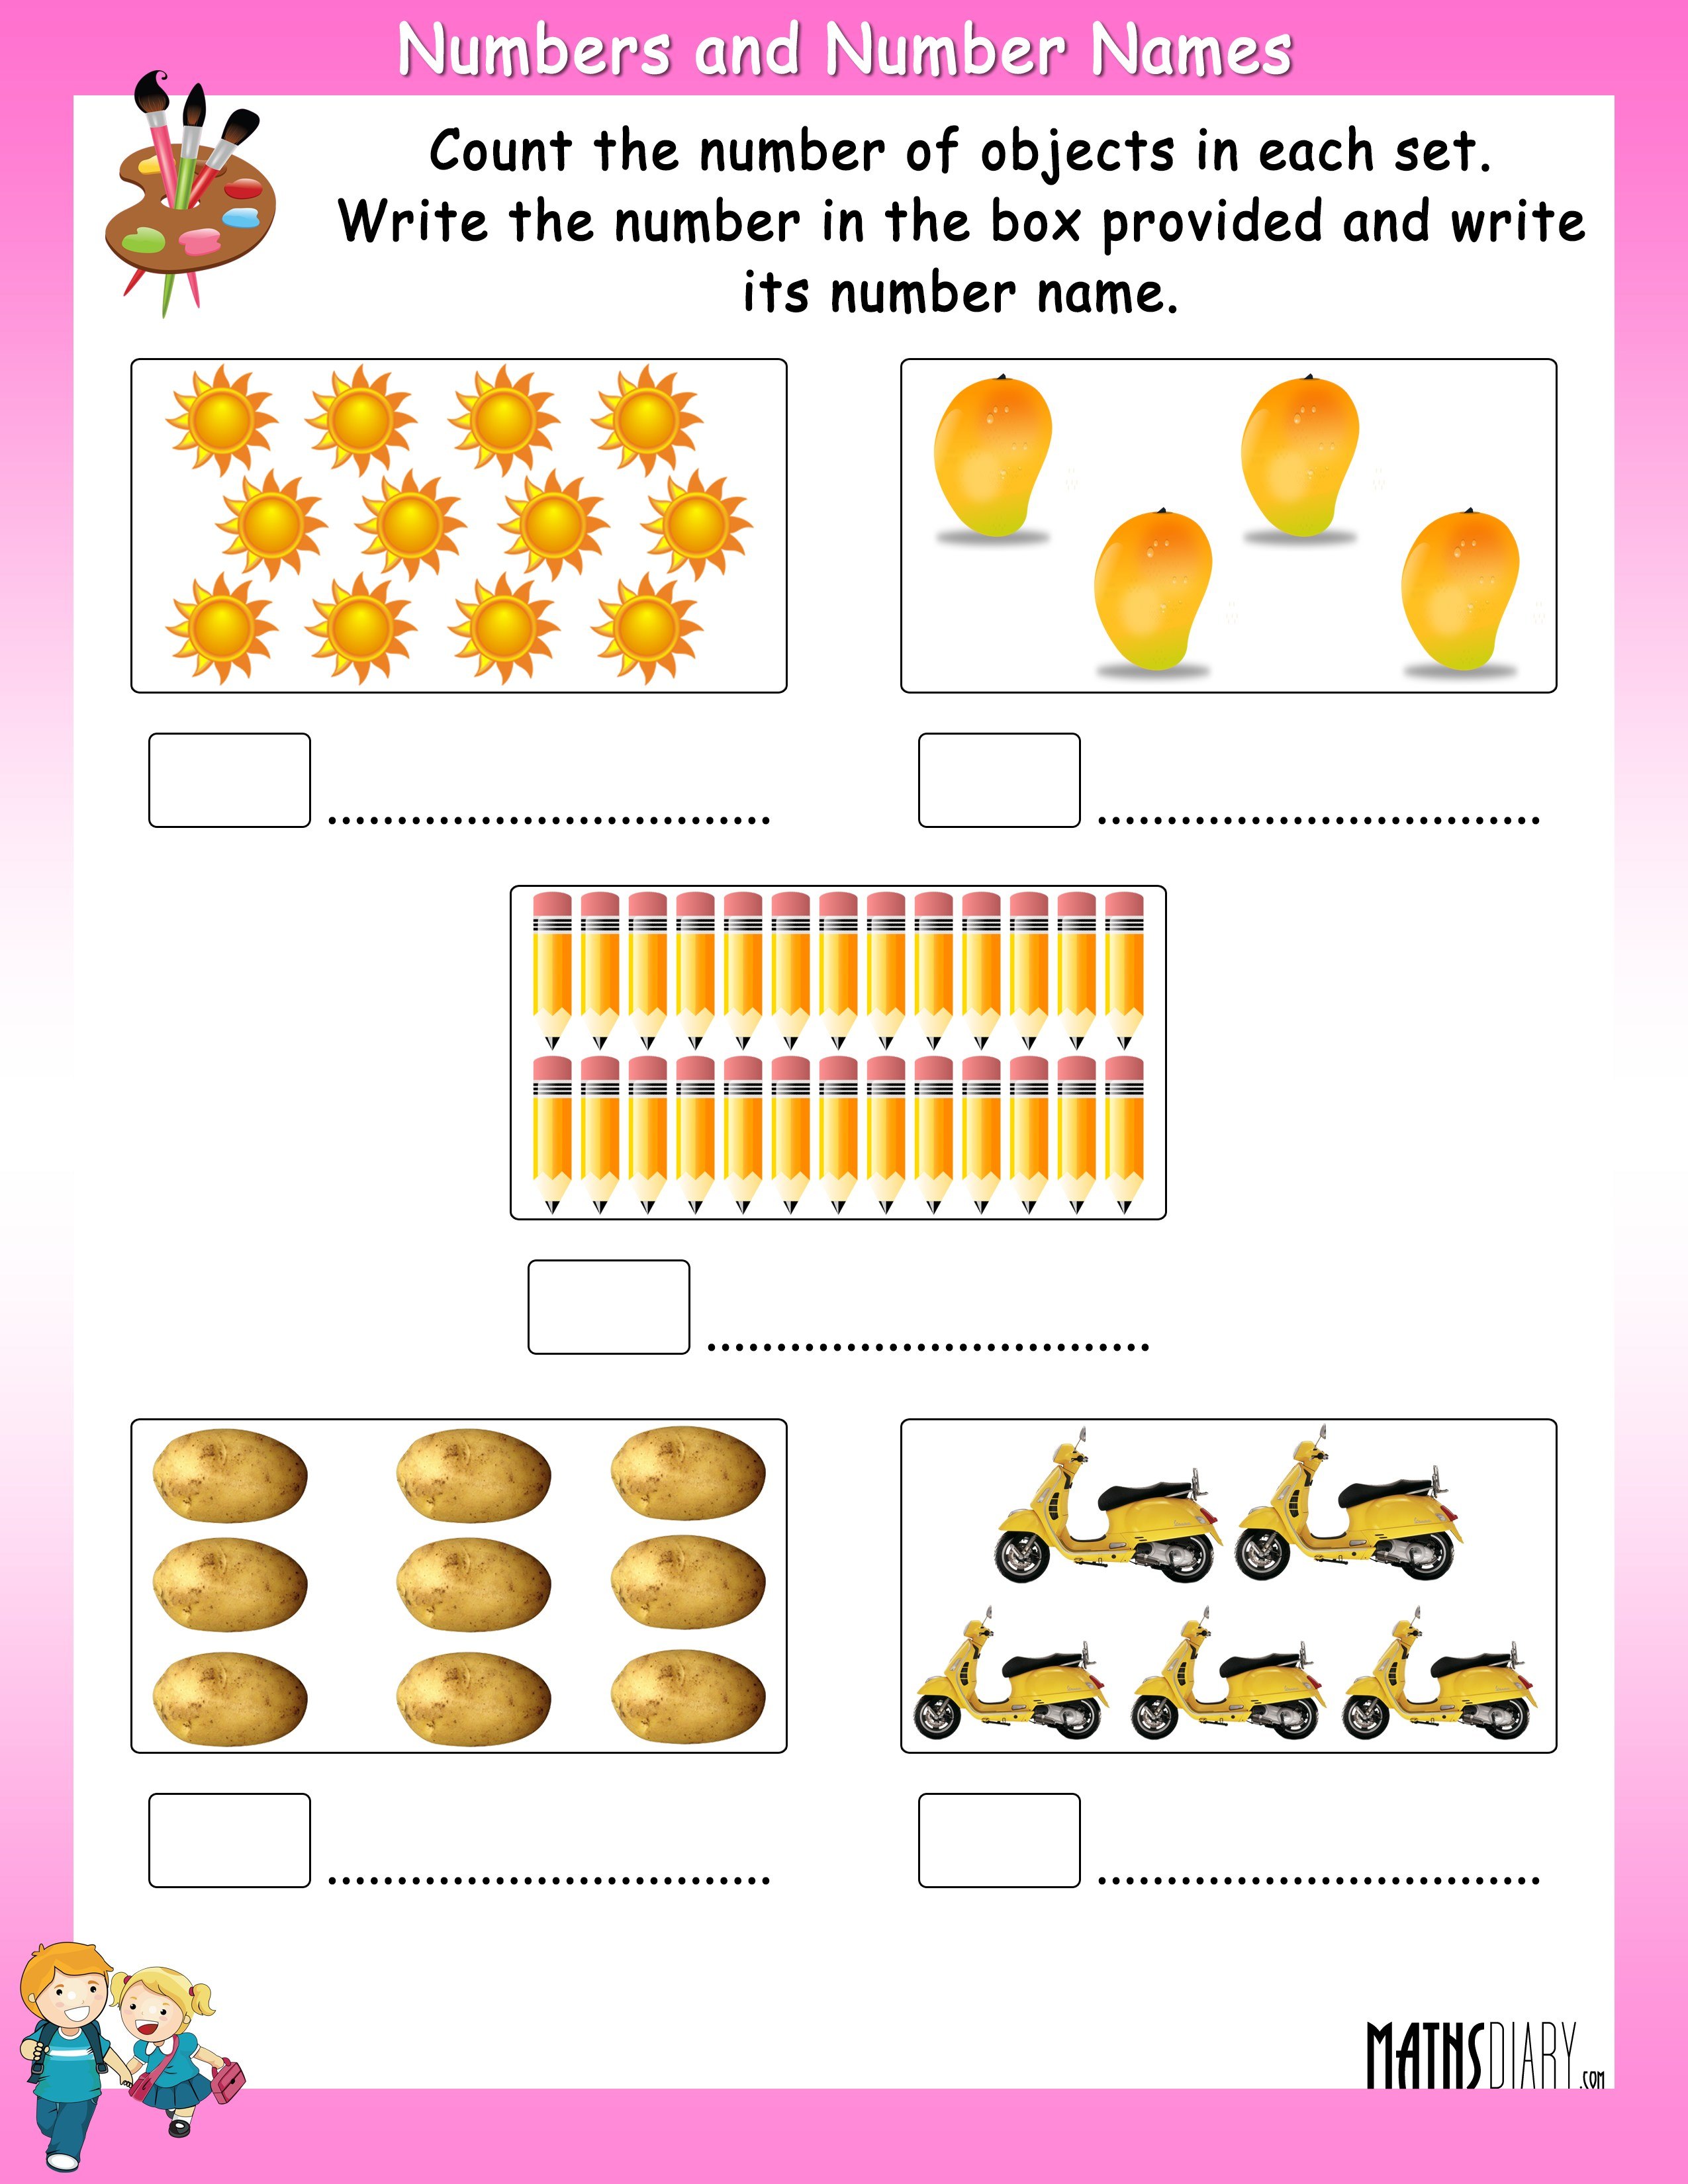 write-number-names-for-given-numbers-math-worksheets-mathsdiarycom